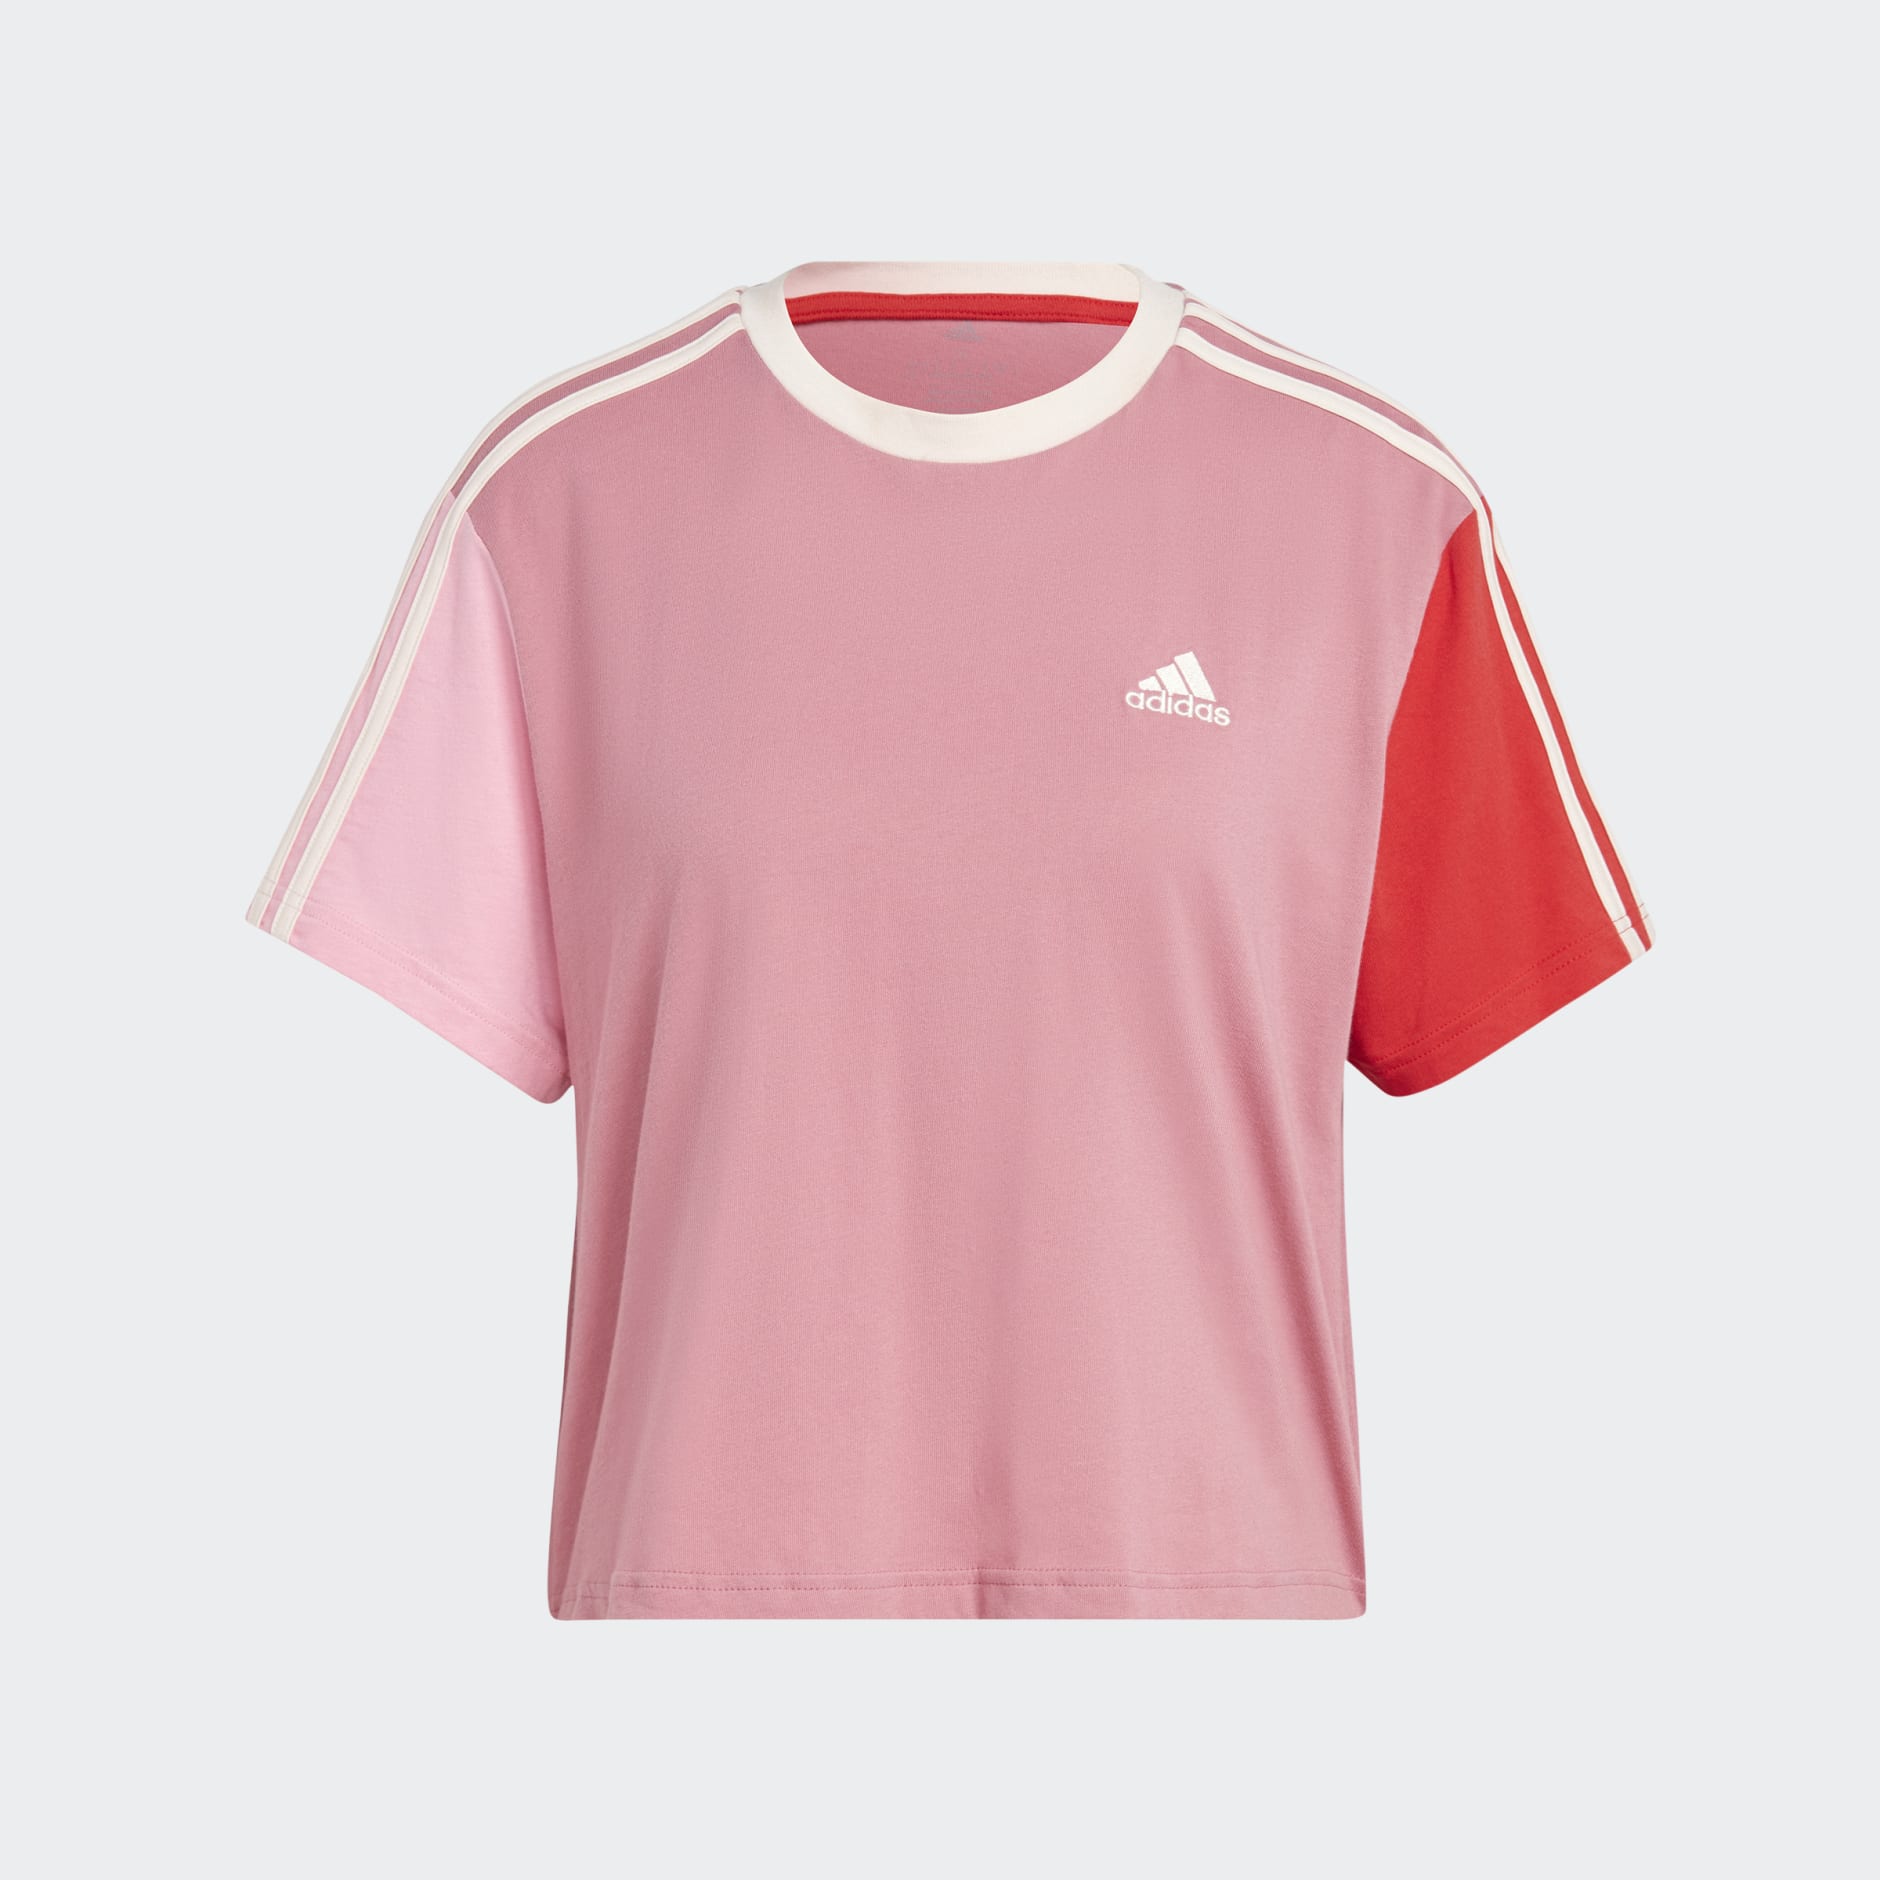 Women's Clothing - Essentials 3-Stripes Single Jersey Crop Top - Pink |  adidas Egypt